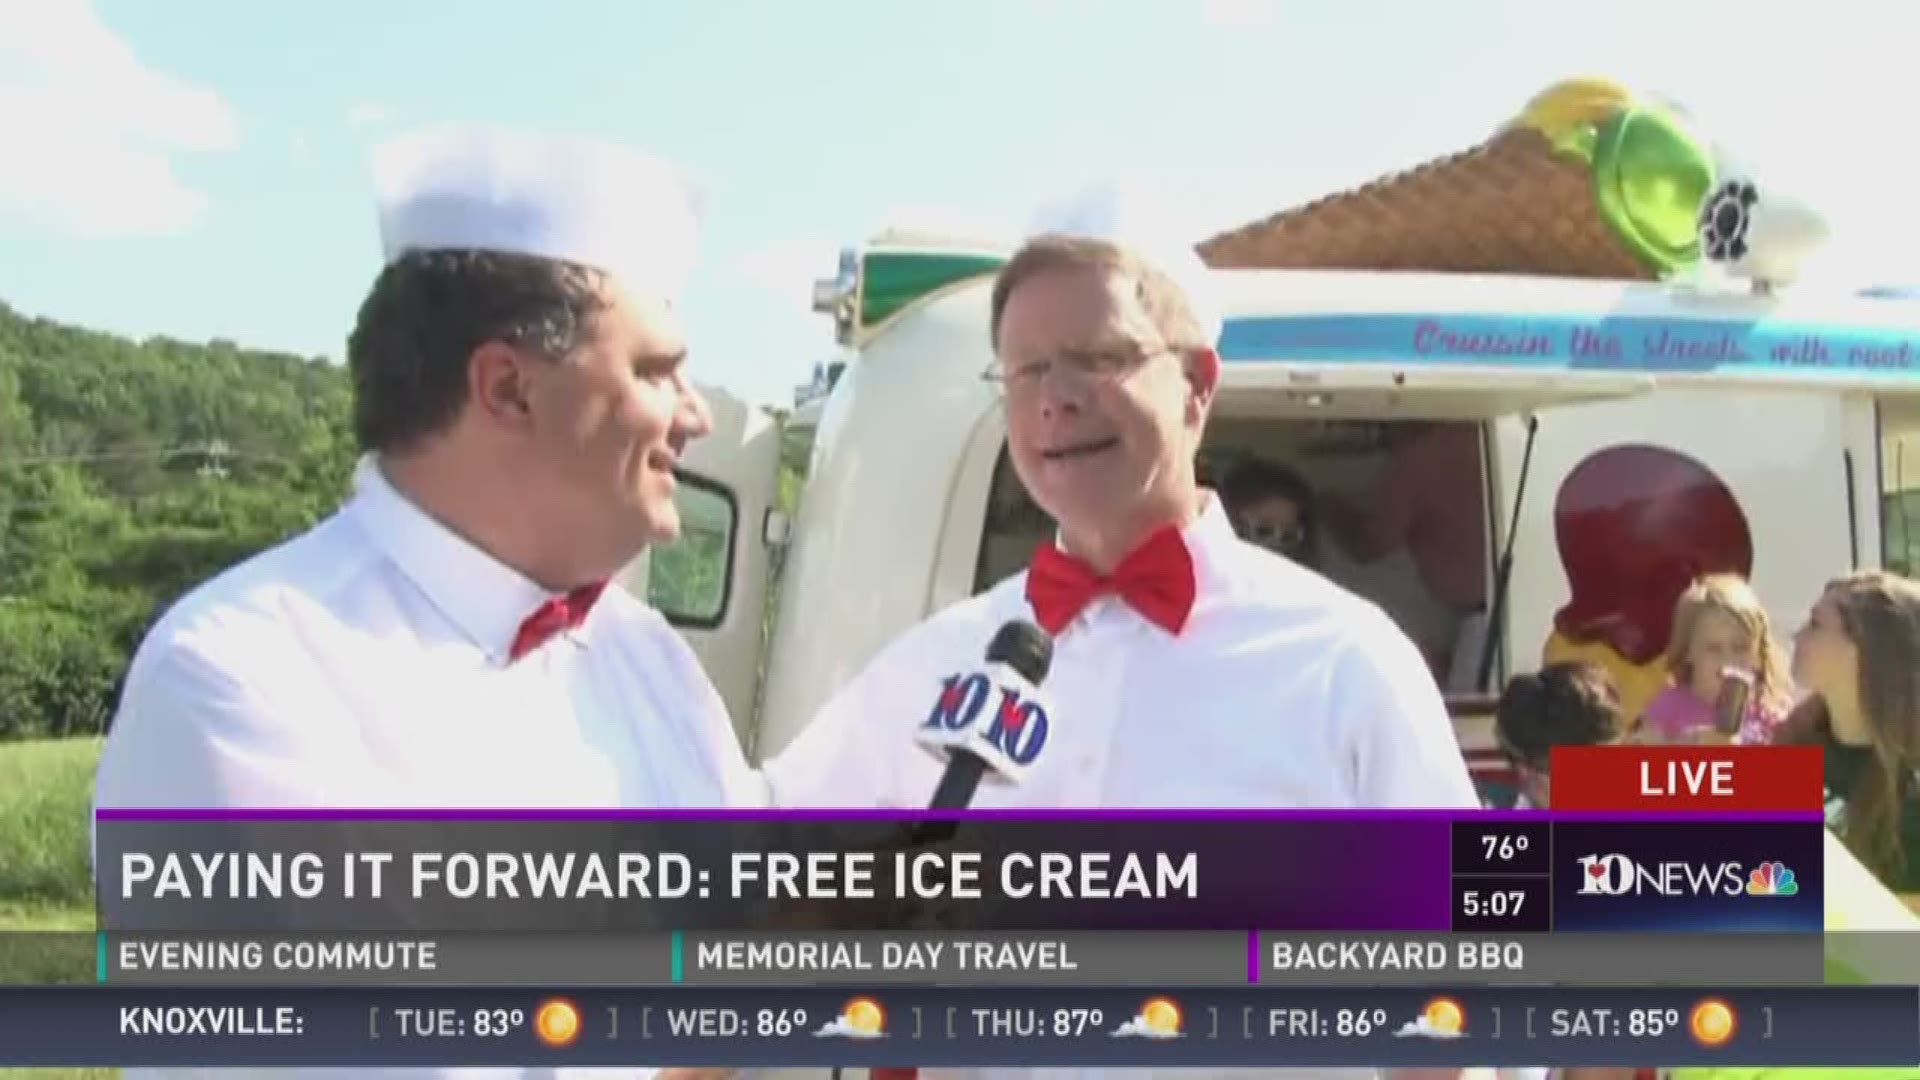 Russell Biven, Todd Howell, and Dr. Bob team up to give ice cream to Knox County kids